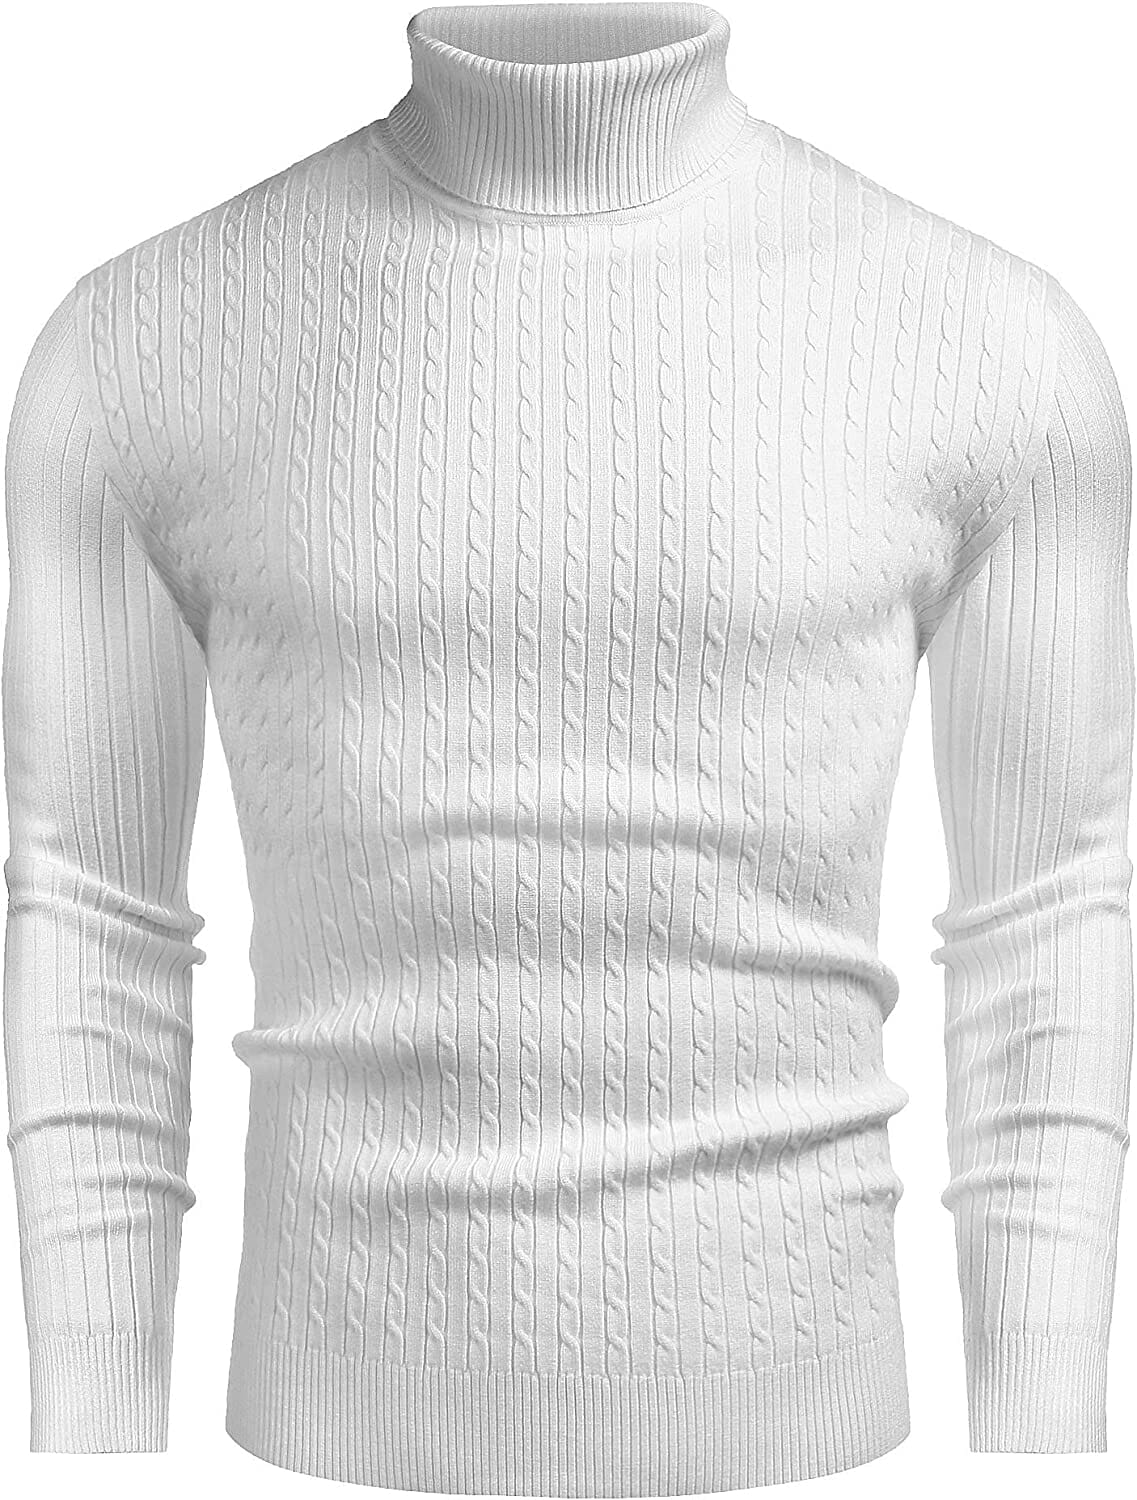 Twist Patterned Pullover Knitted Sweater (US Only) Sweater COOFANDY Store White S 